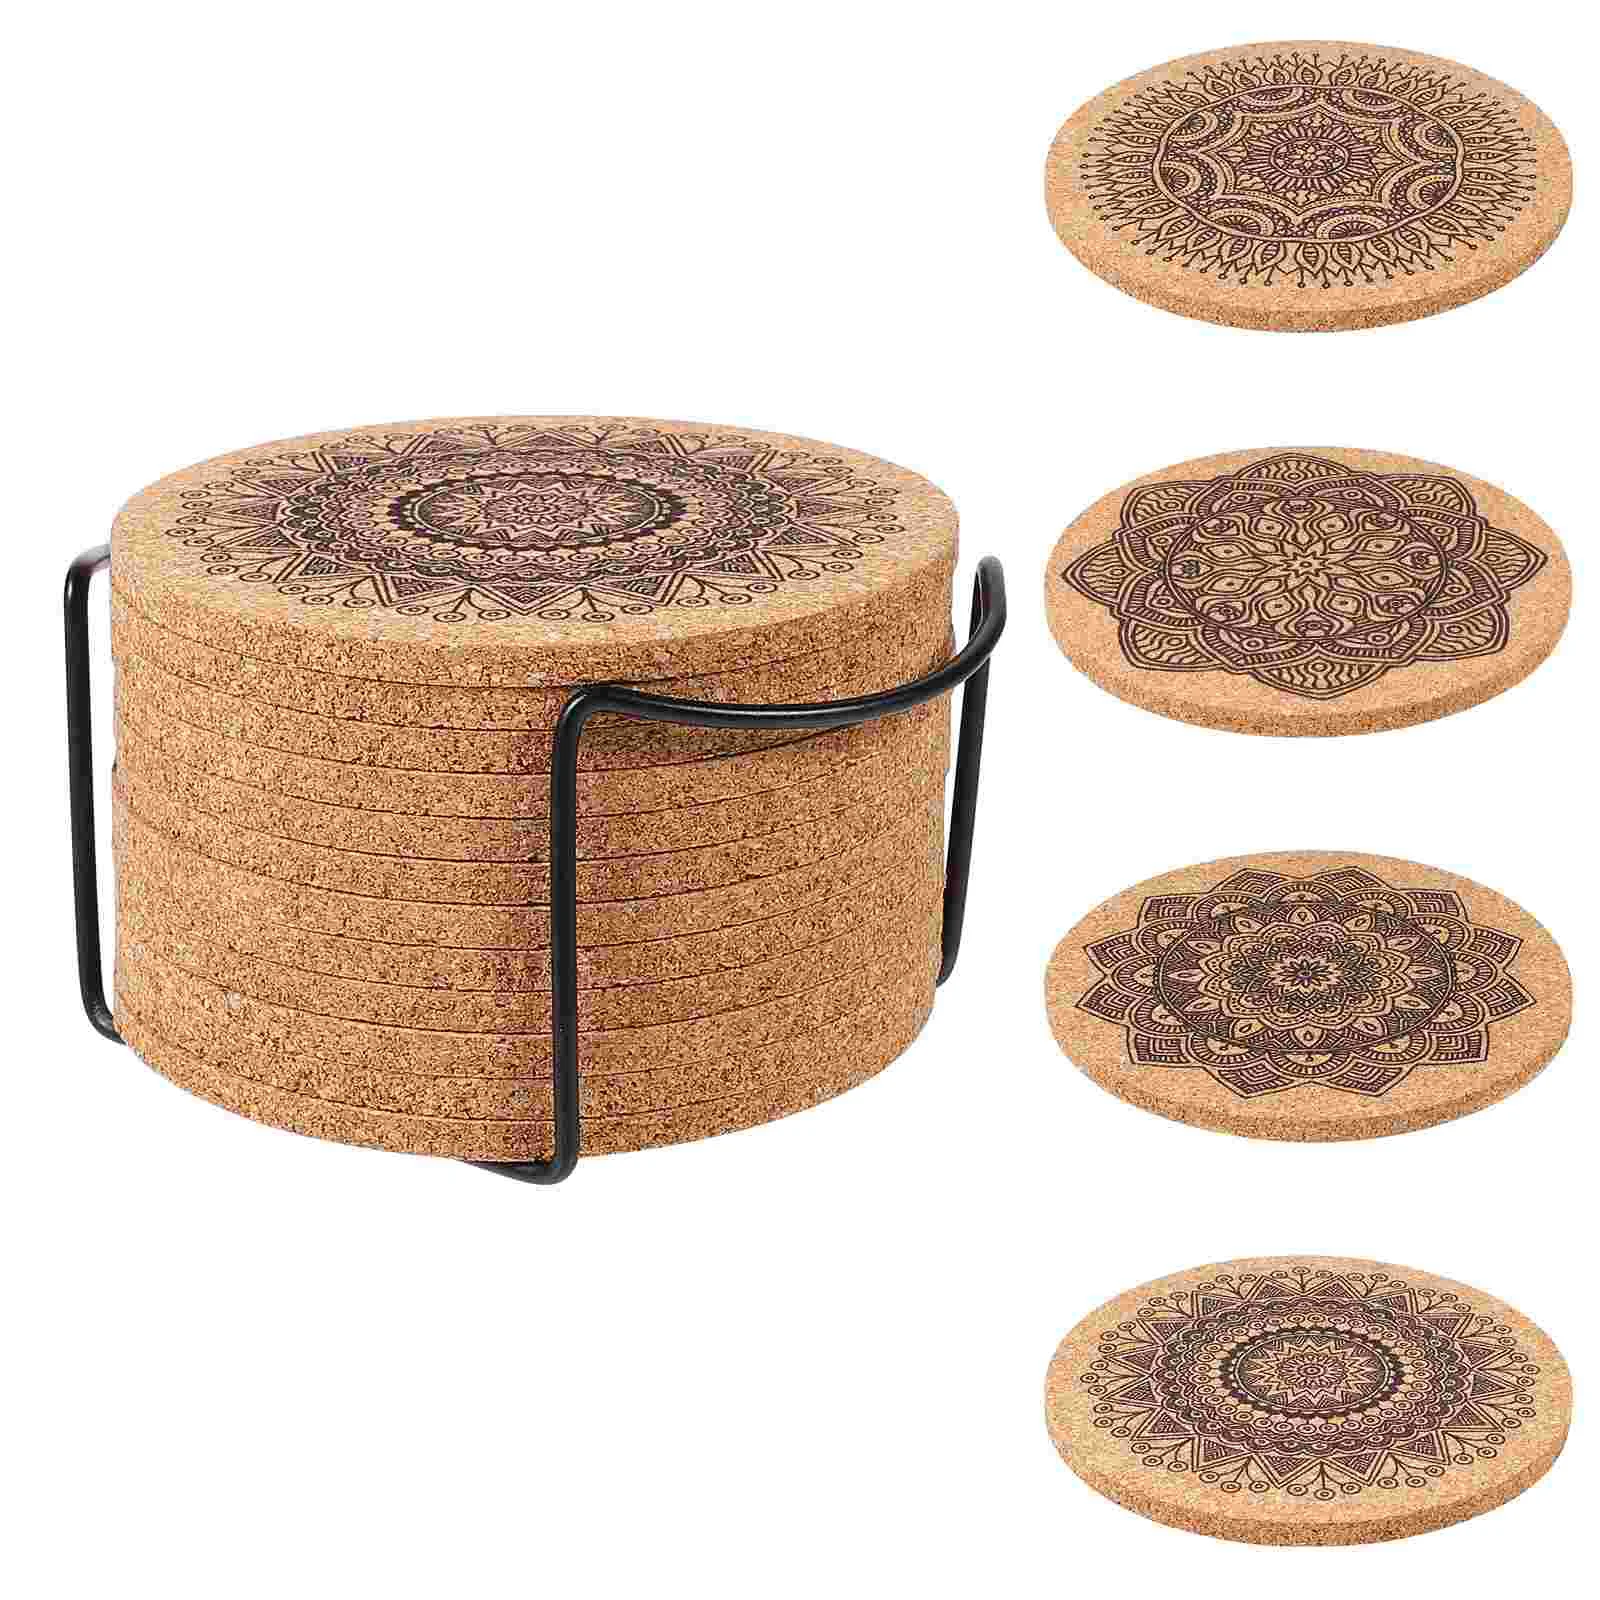 

Dining Table Set Place Mats Coasters Absorbent Coasters Drink Coasters Cork Placemats Drink Mats Round Coaster Cup Holder Set